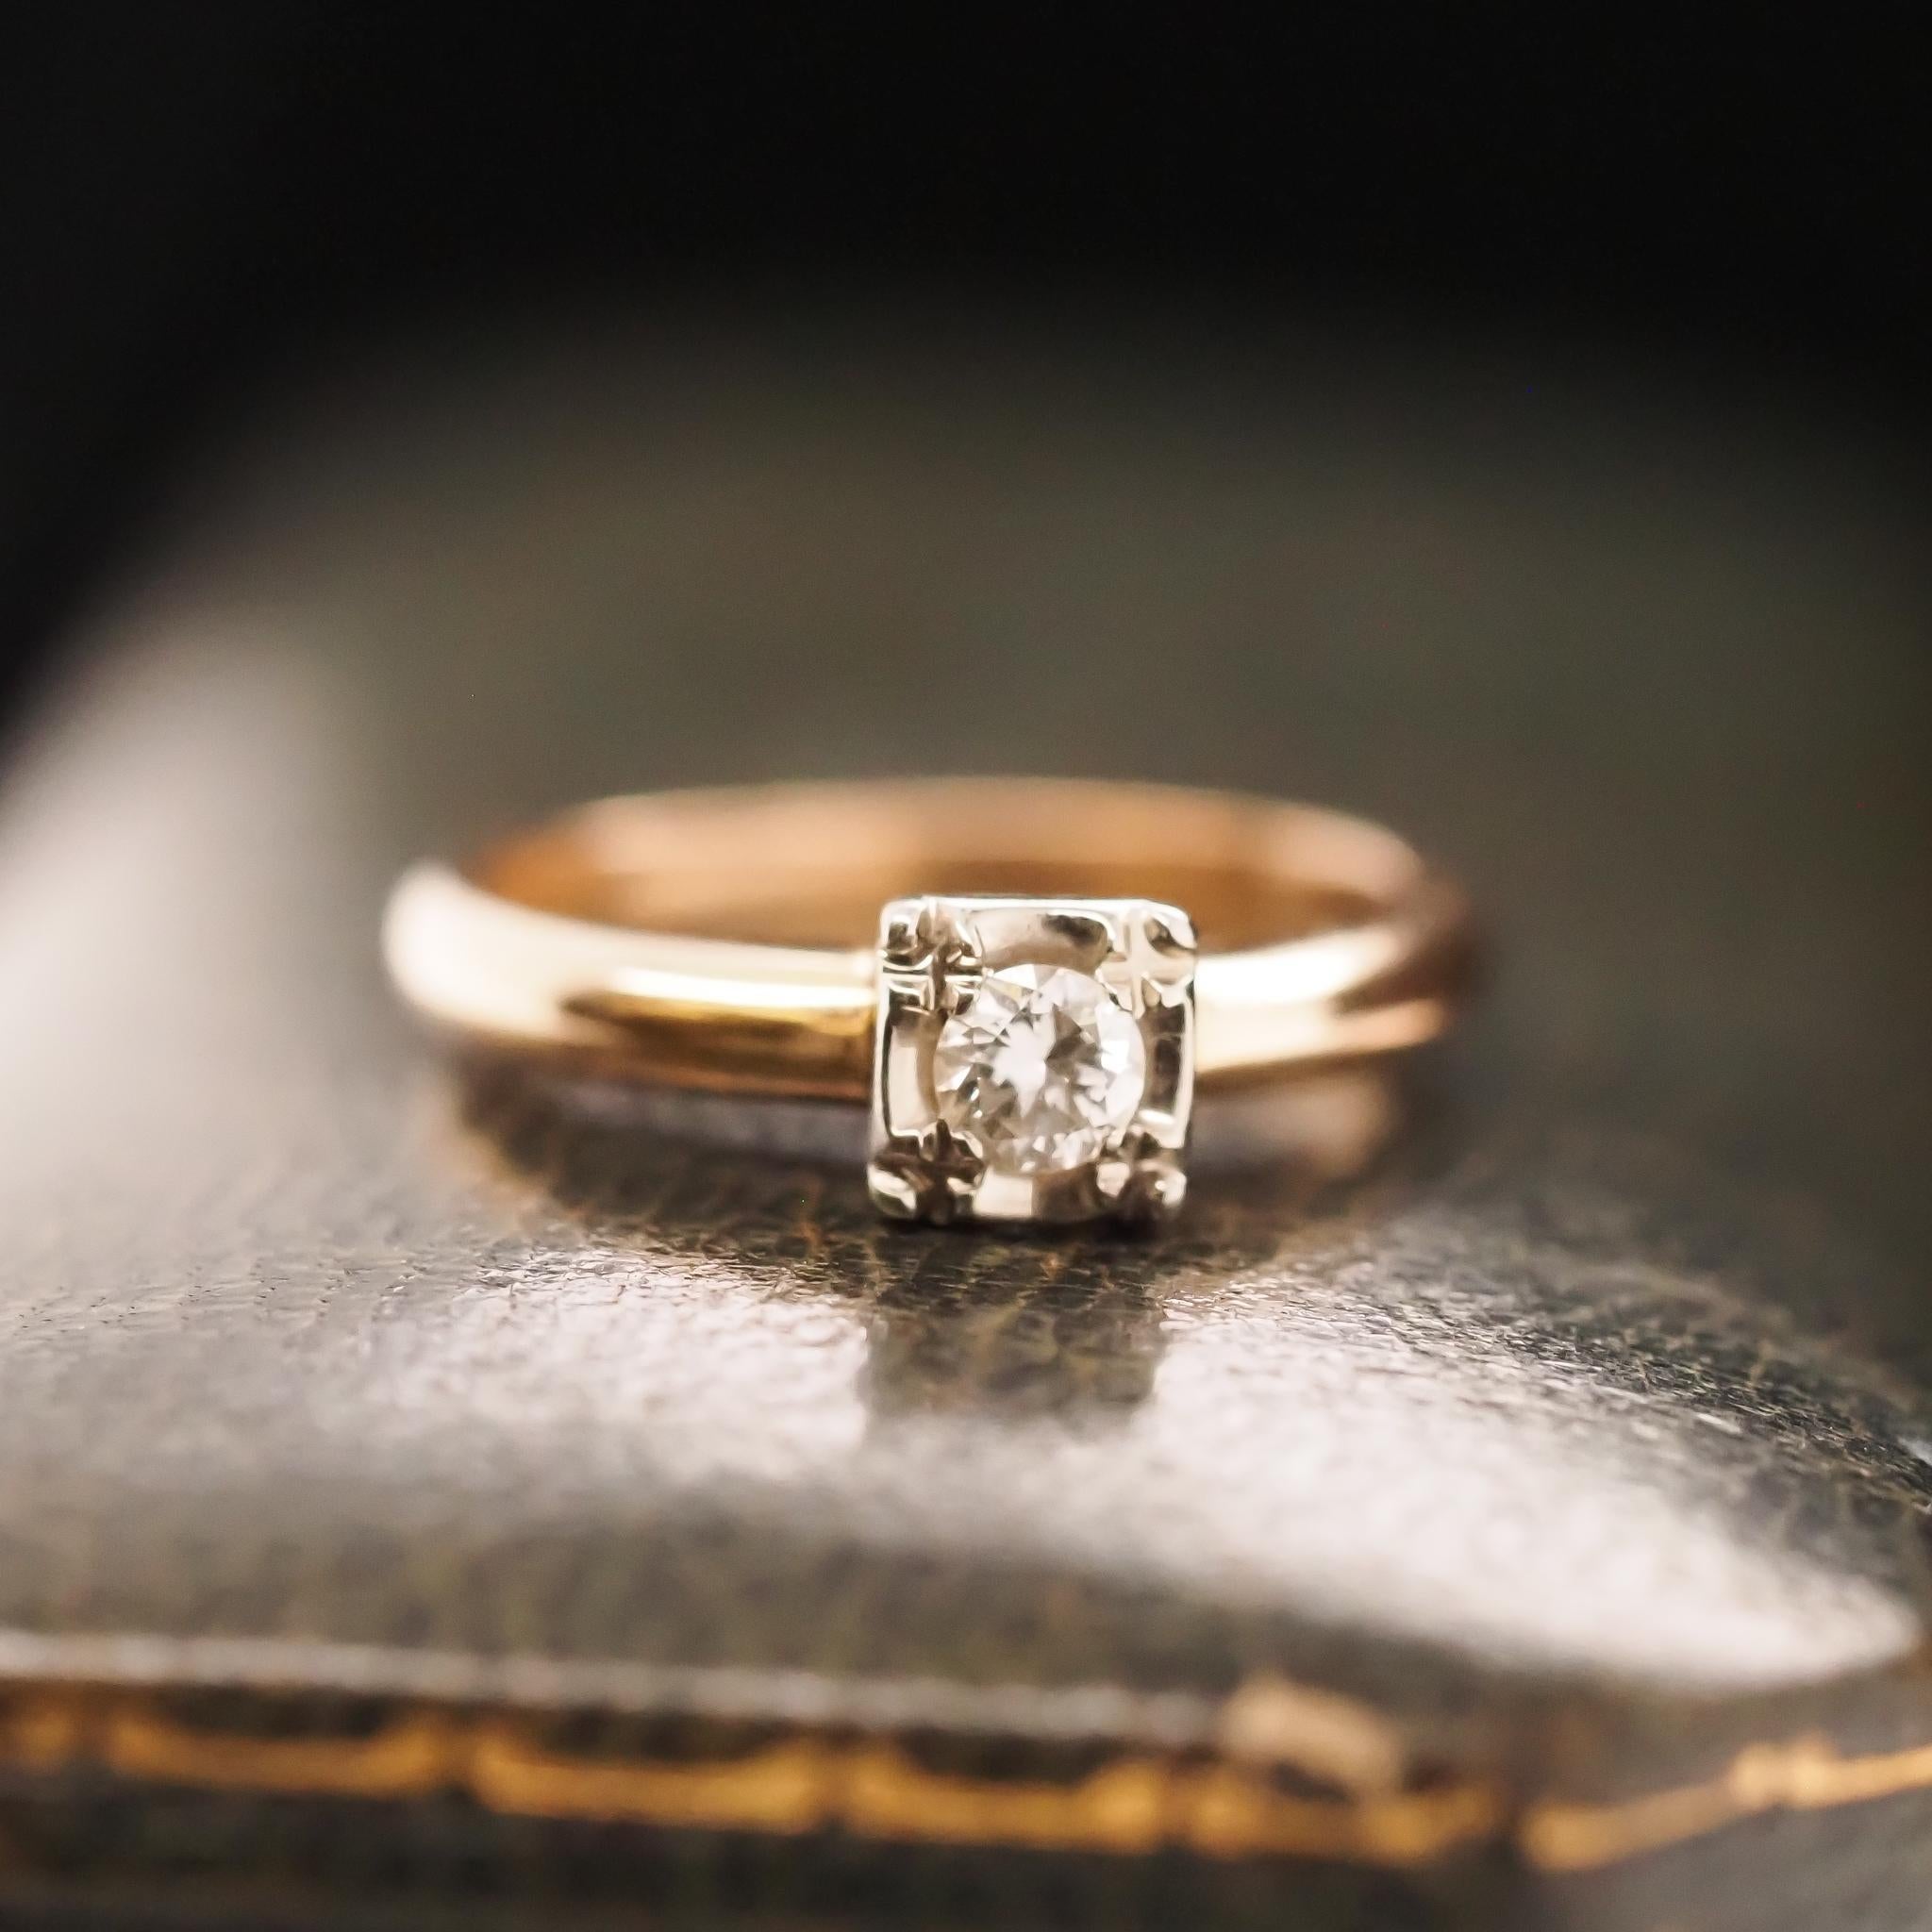 Year:
Item Details:
Ring Size: 5.5
Metal Type: 14k Yellow Gold [Hallmarked, and Tested]
Weight: 3.1 grams
Diamond Details: .15ct, Old European Transitional Cut, H Color, VS Clarity
Band Width: 2.23 mm
Condition: Excellent
Vintage